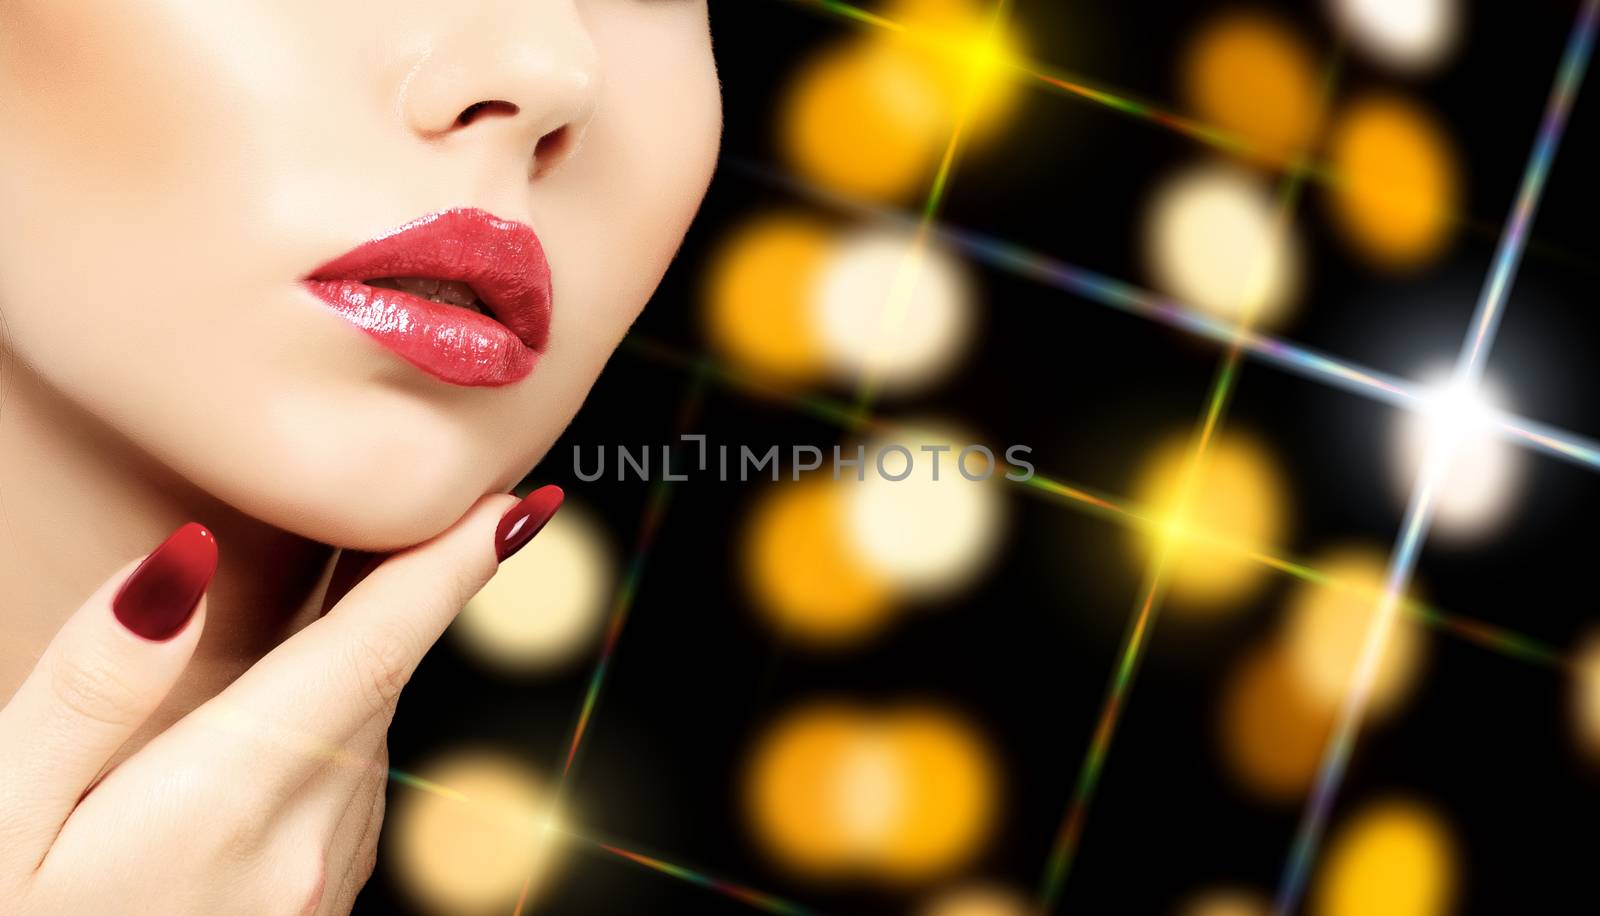 Beautiful woman face against an abstract background with blurred lights